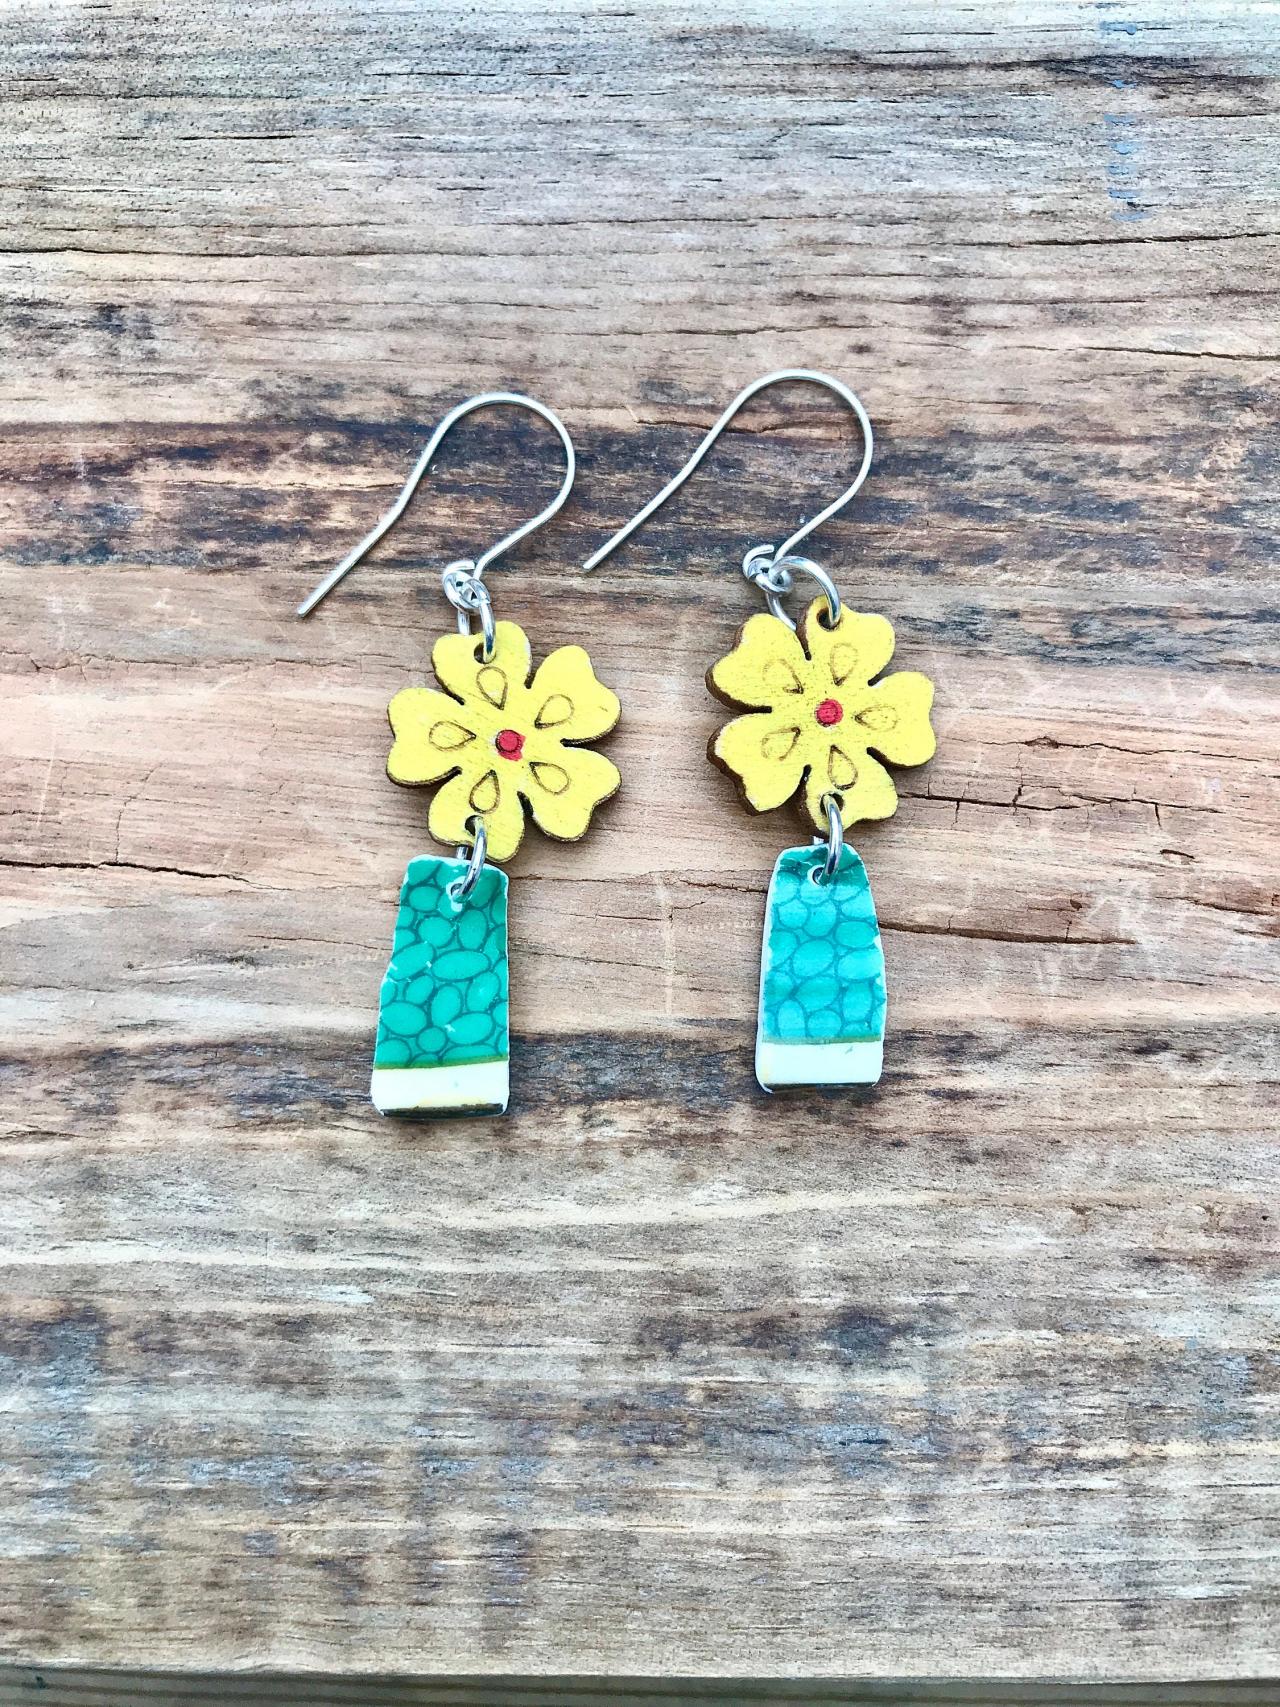 Pretty Yellow Flower And Green Bone China Earrings With Sterling Silver Wires.